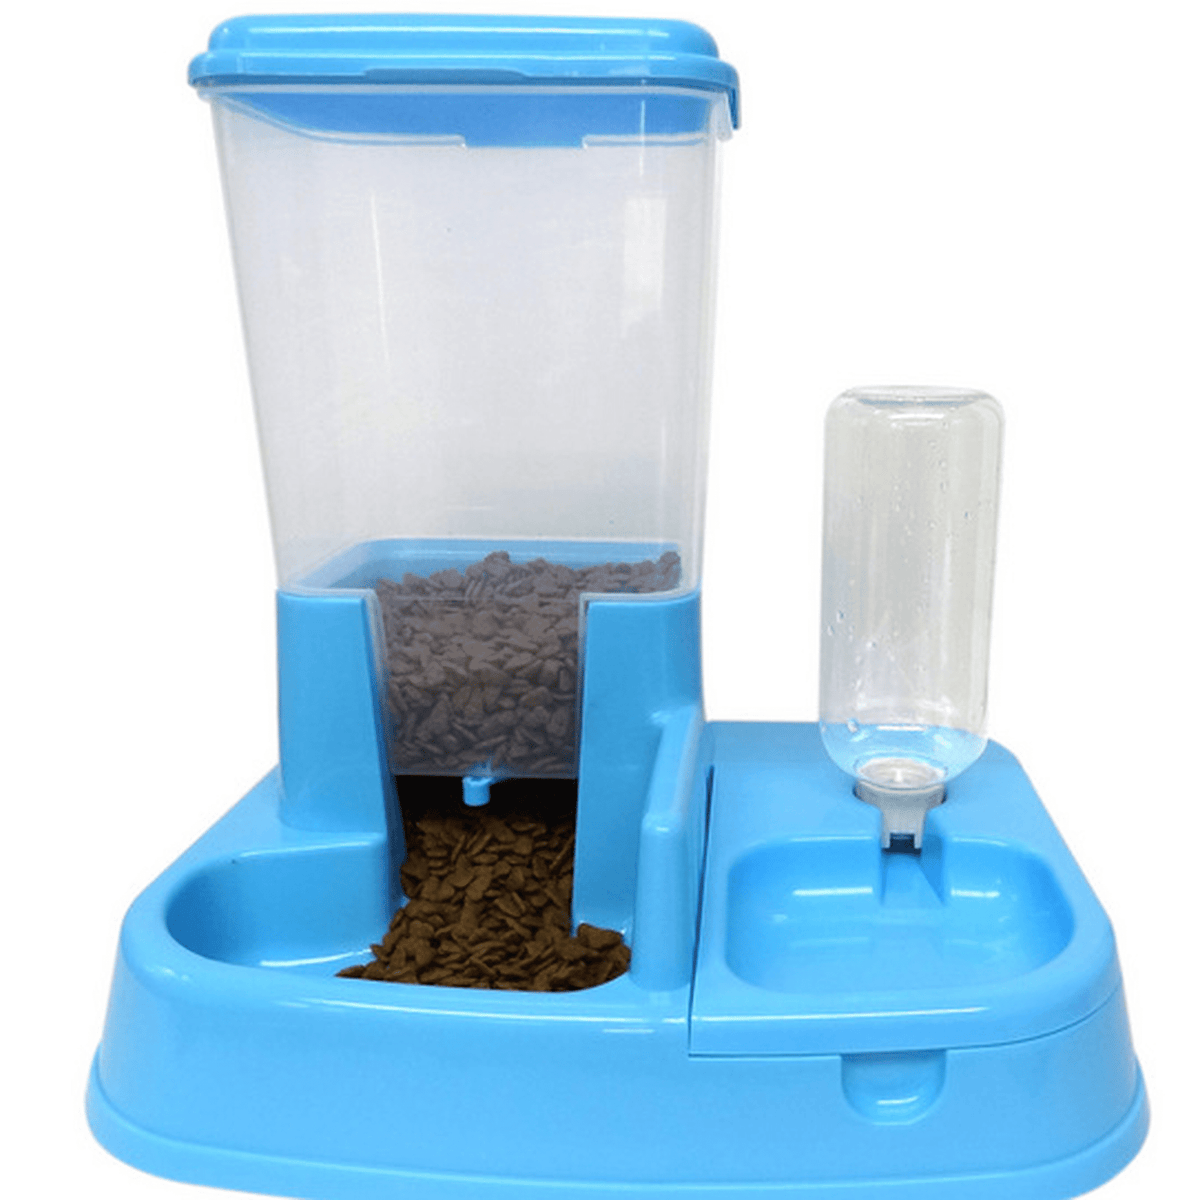 🐾 Adjustable Flow Rate Automatic Pet Feeder 🔁